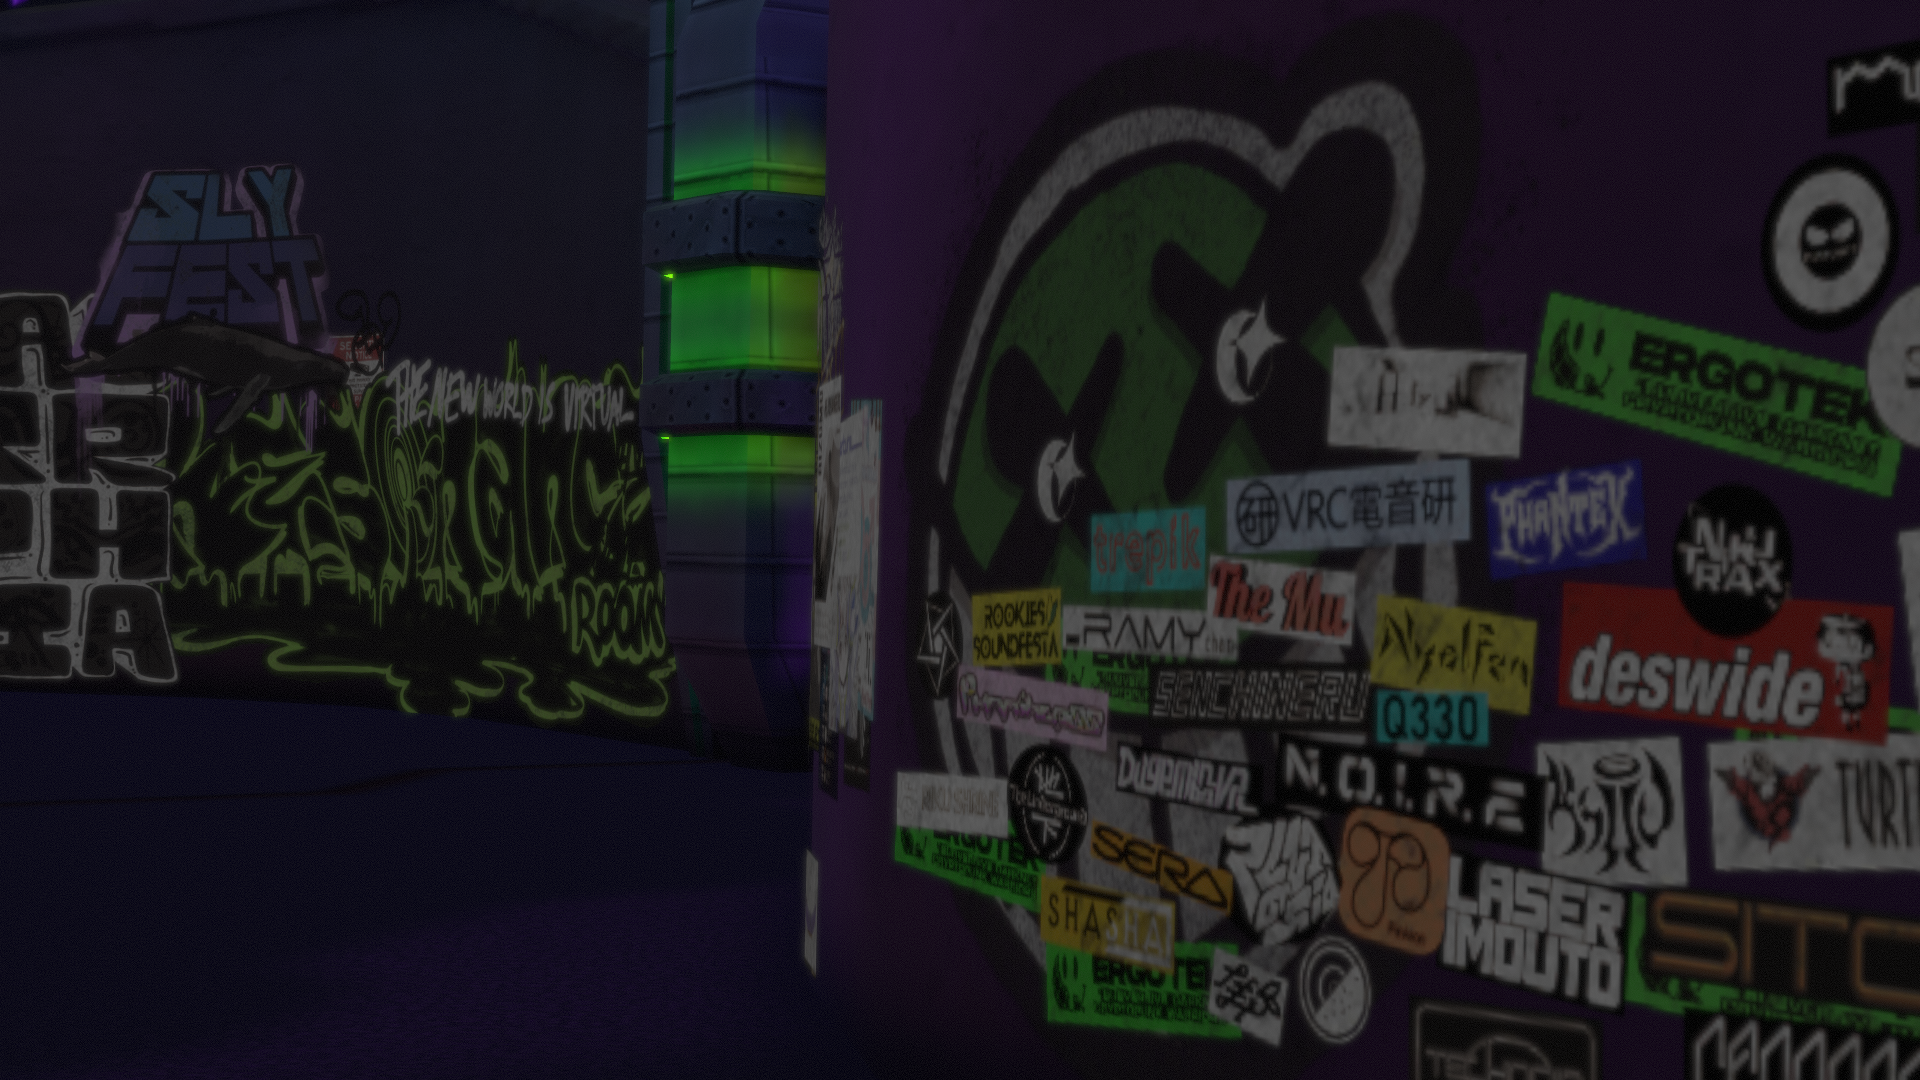 VRChat In 2022: The Era of Musical Decentralization